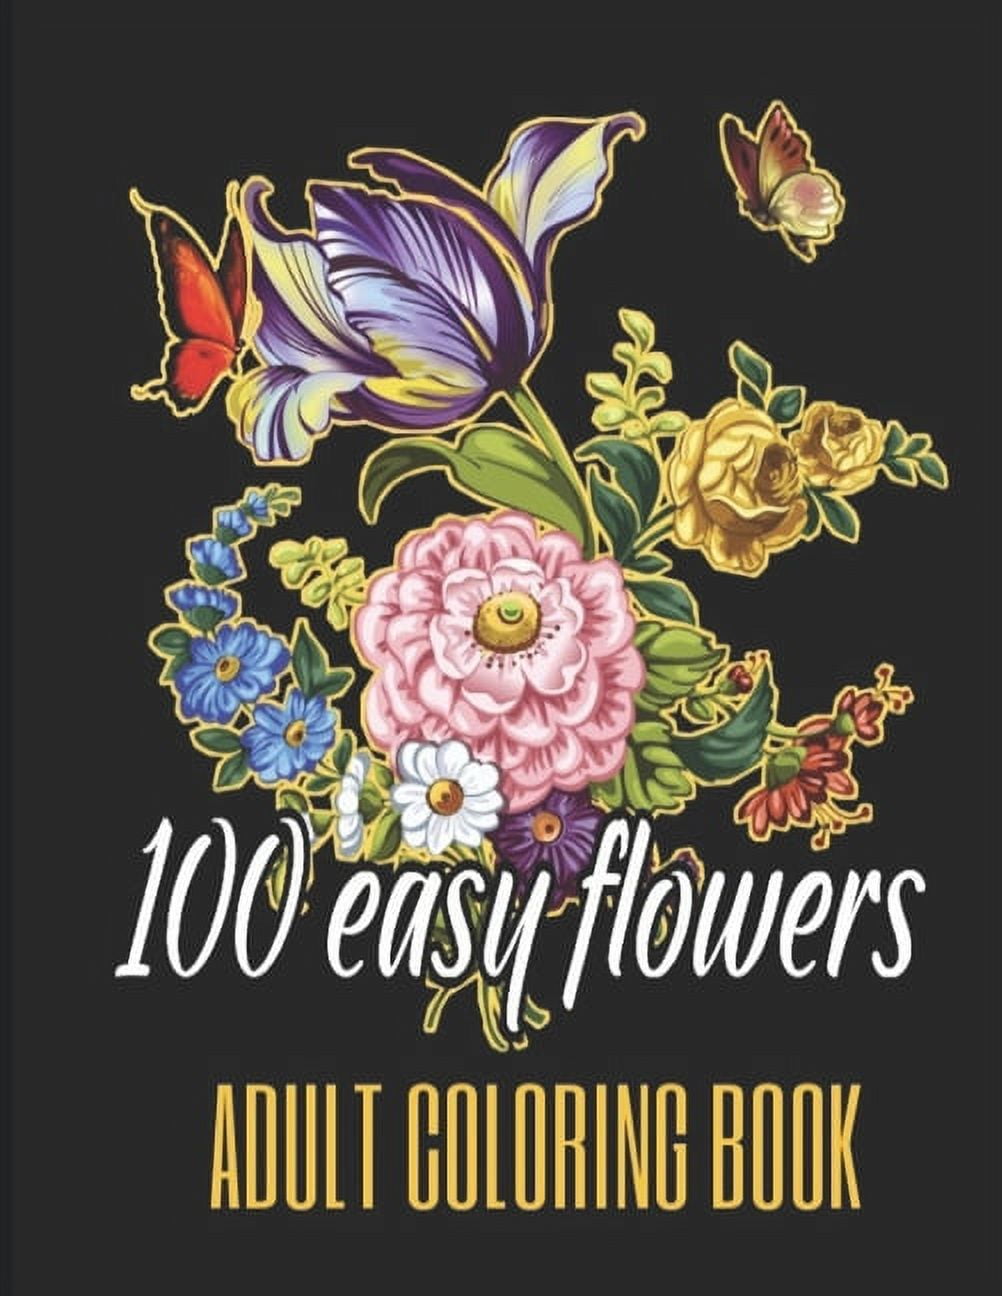 Large Print Color By Number Coloring Book For Senior: Easy and Simple Large  Print Pages for Adults and Seior . Sweet Home Theme with Flowers, Animals,  (Paperback)